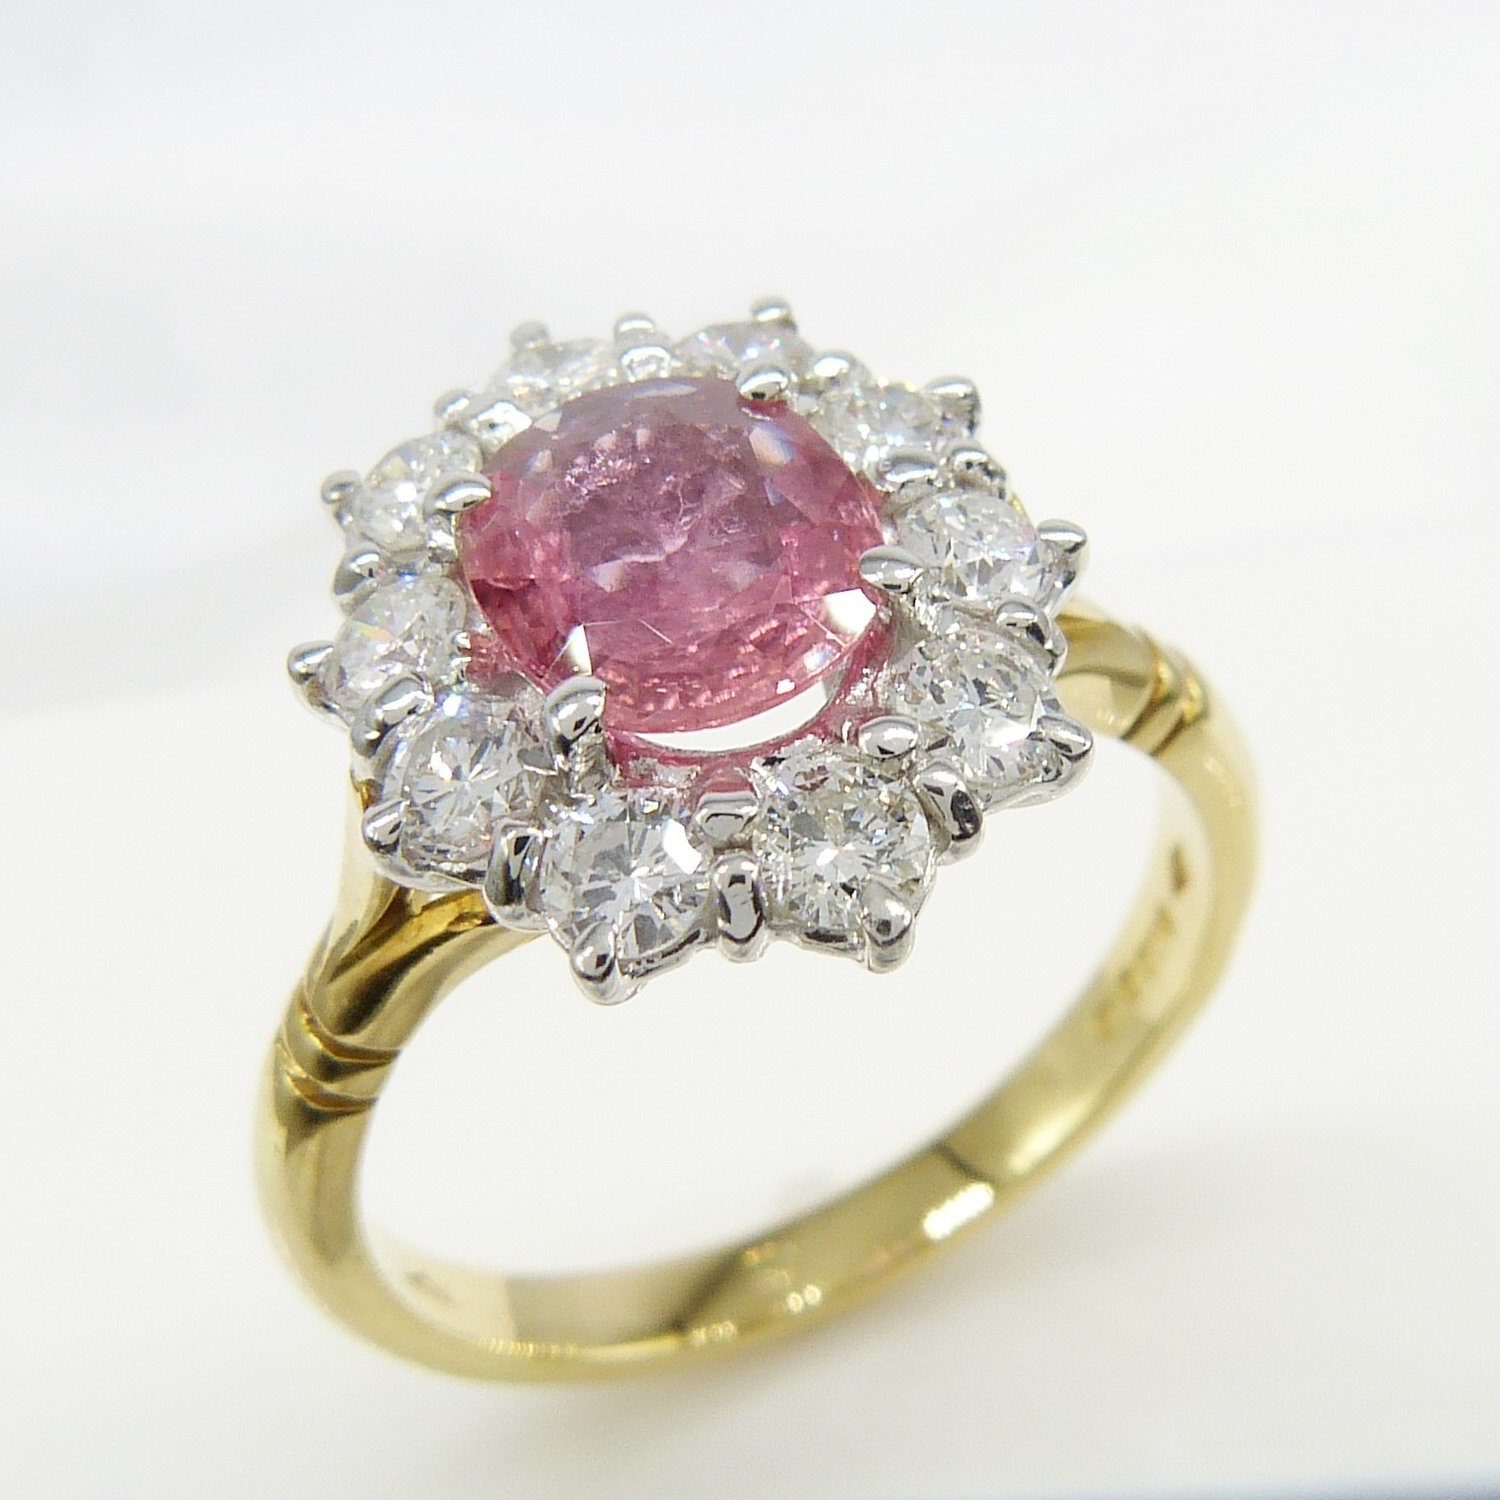 A pinkish-red natural Ruby and Diamond cluster ring in 18ct yellow and white Gold - Image 8 of 10